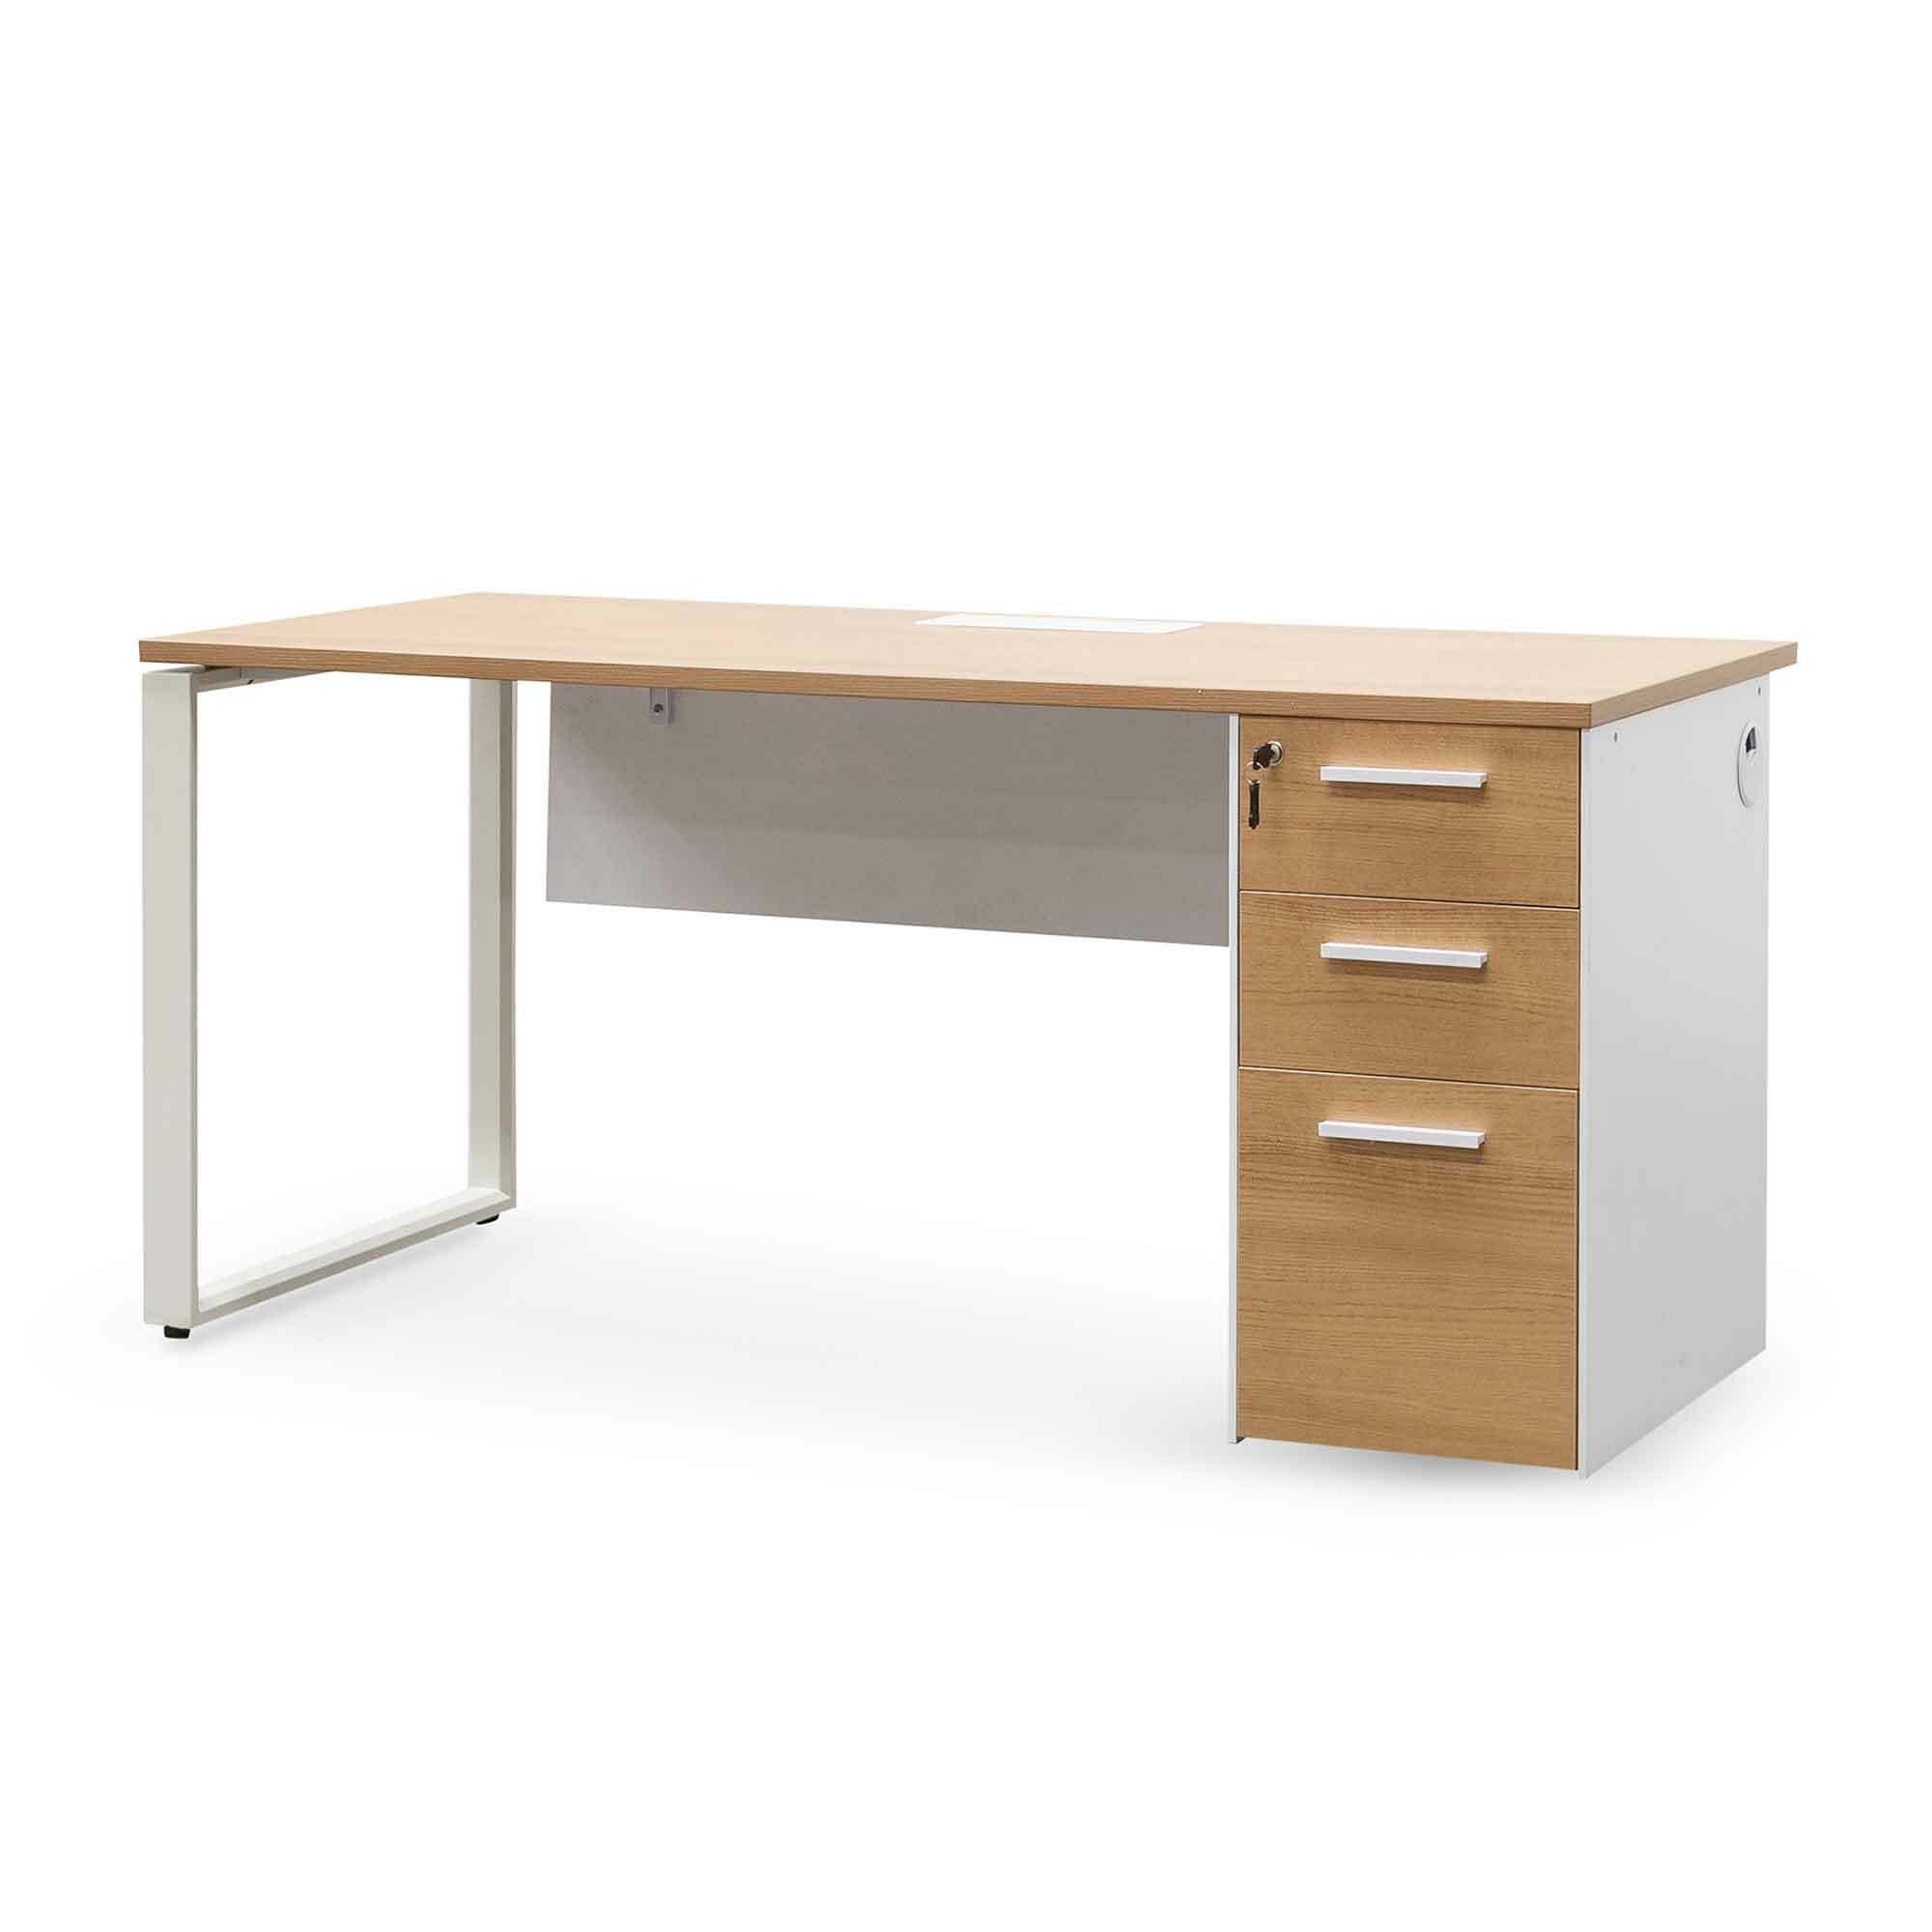 Halo 1 Seater Office Desk - Natural and White